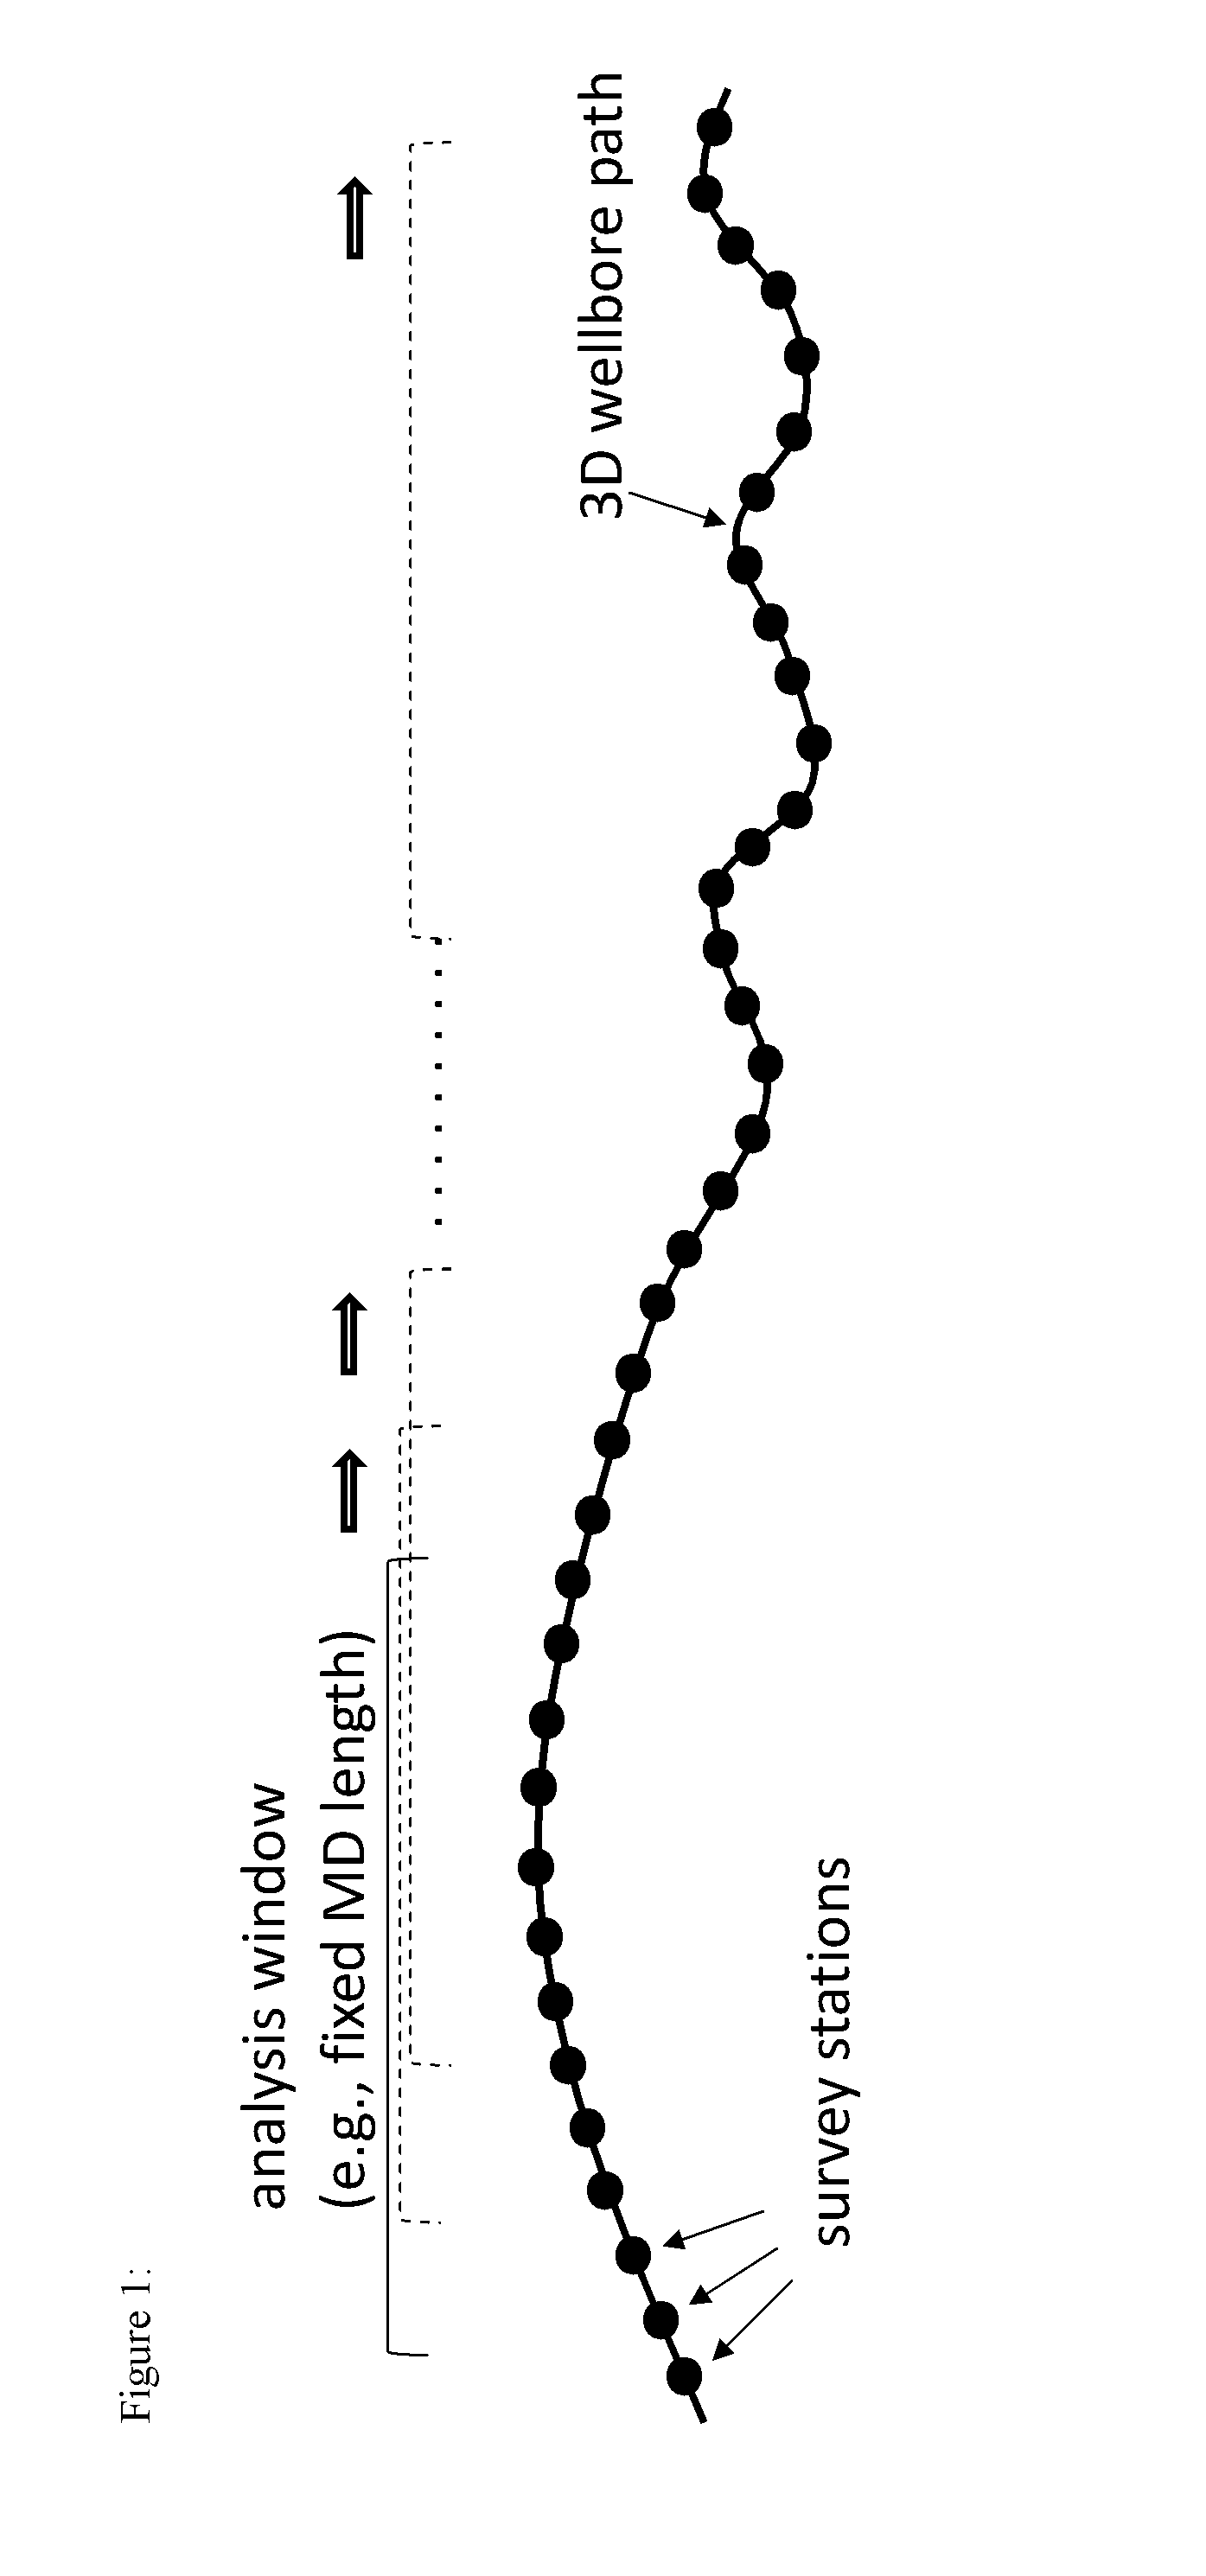 System and method for analyzing wellbore survey data to determine tortuosity of the wellbore using tortuosity parameter values